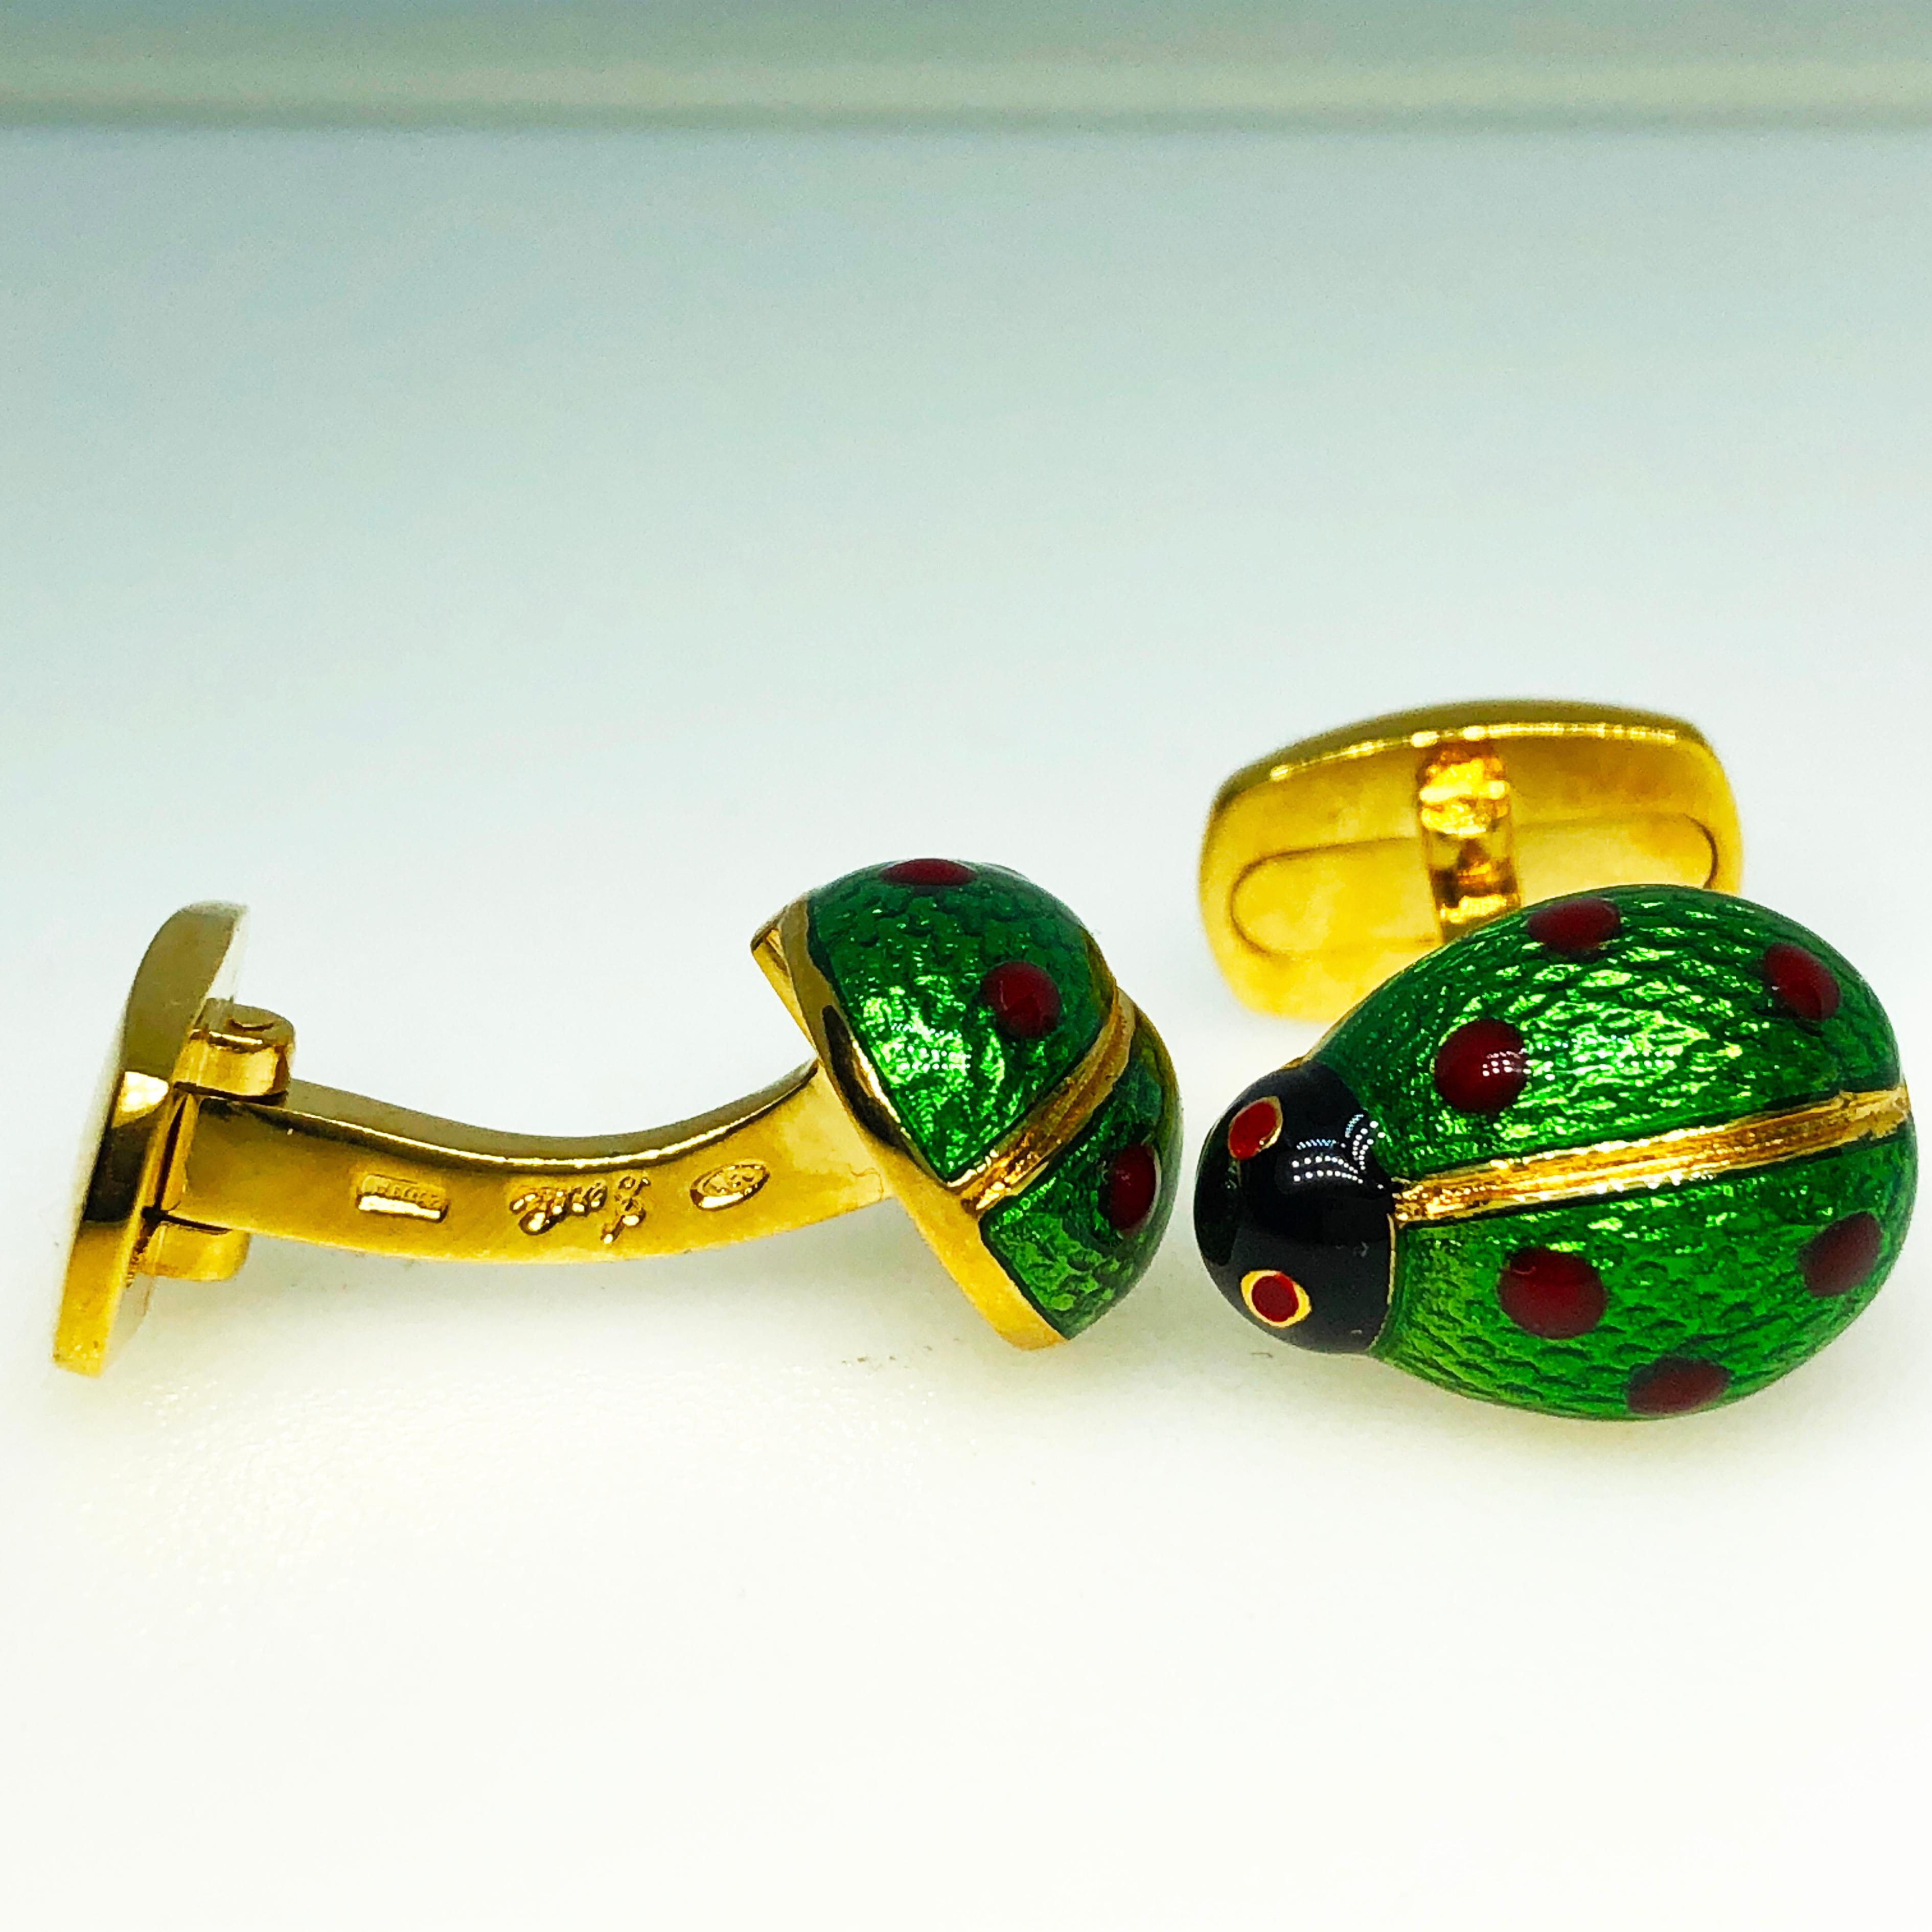 Contemporary Hand Enameled Ladybug Shaped T-Bar Back Sterling Silver Gold-Plated Cufflinks